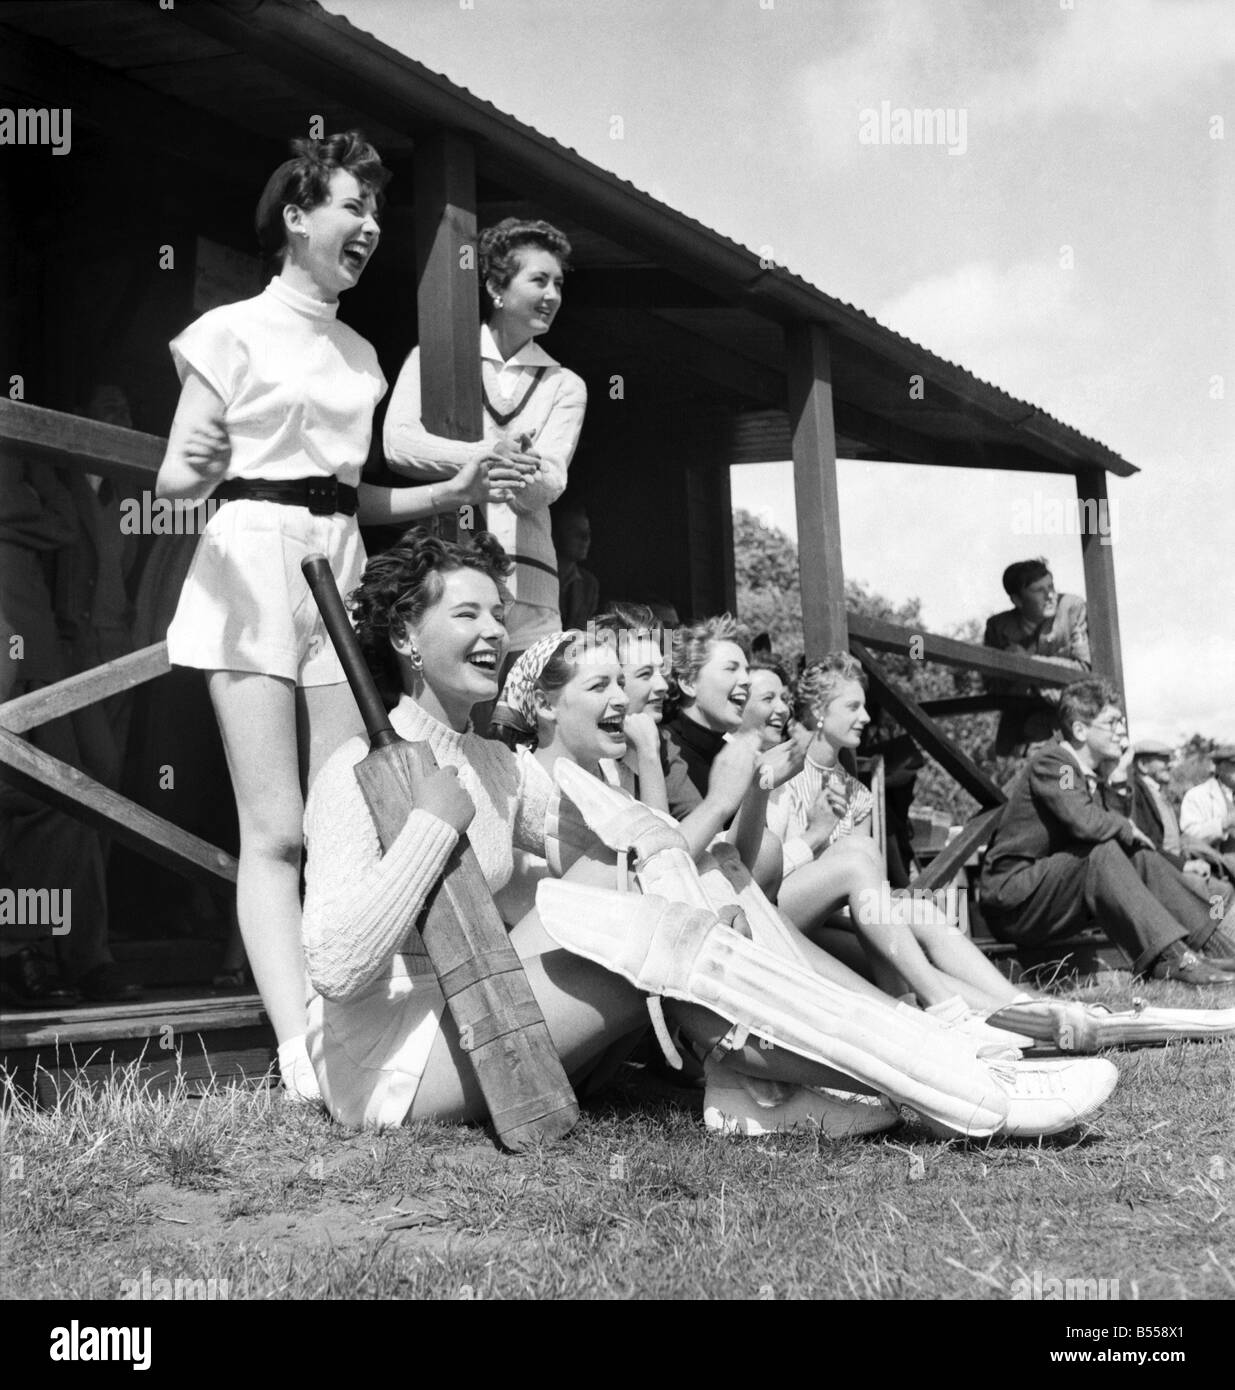 Sport: Cricket Women: Almost every inhabitant of the little village of Puttenham, near Guildford, turned out to see their local Stock Photo